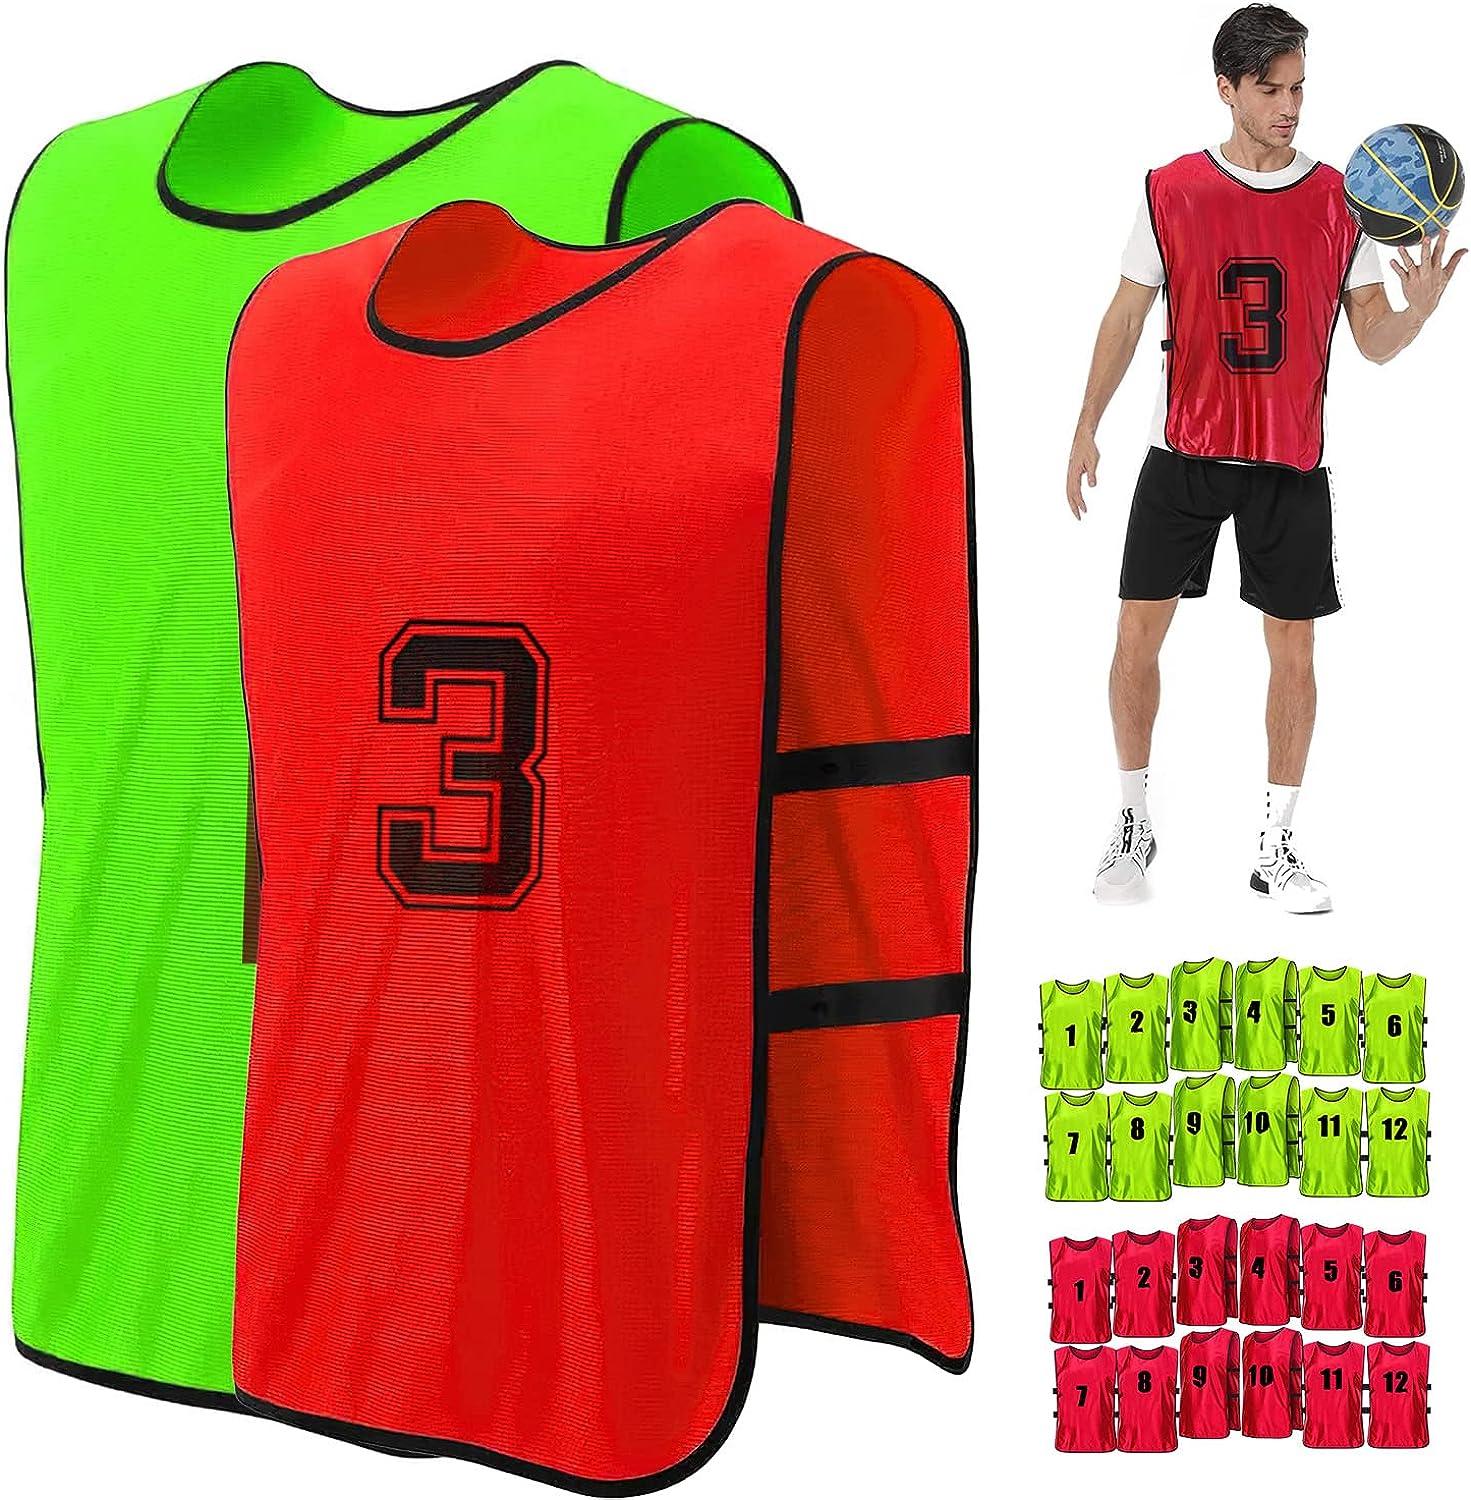 24 Pack Scrimmage Team Soccer Pinnies Vests Jerseys with Belt Basketball Football  Practice Jerseys for Men